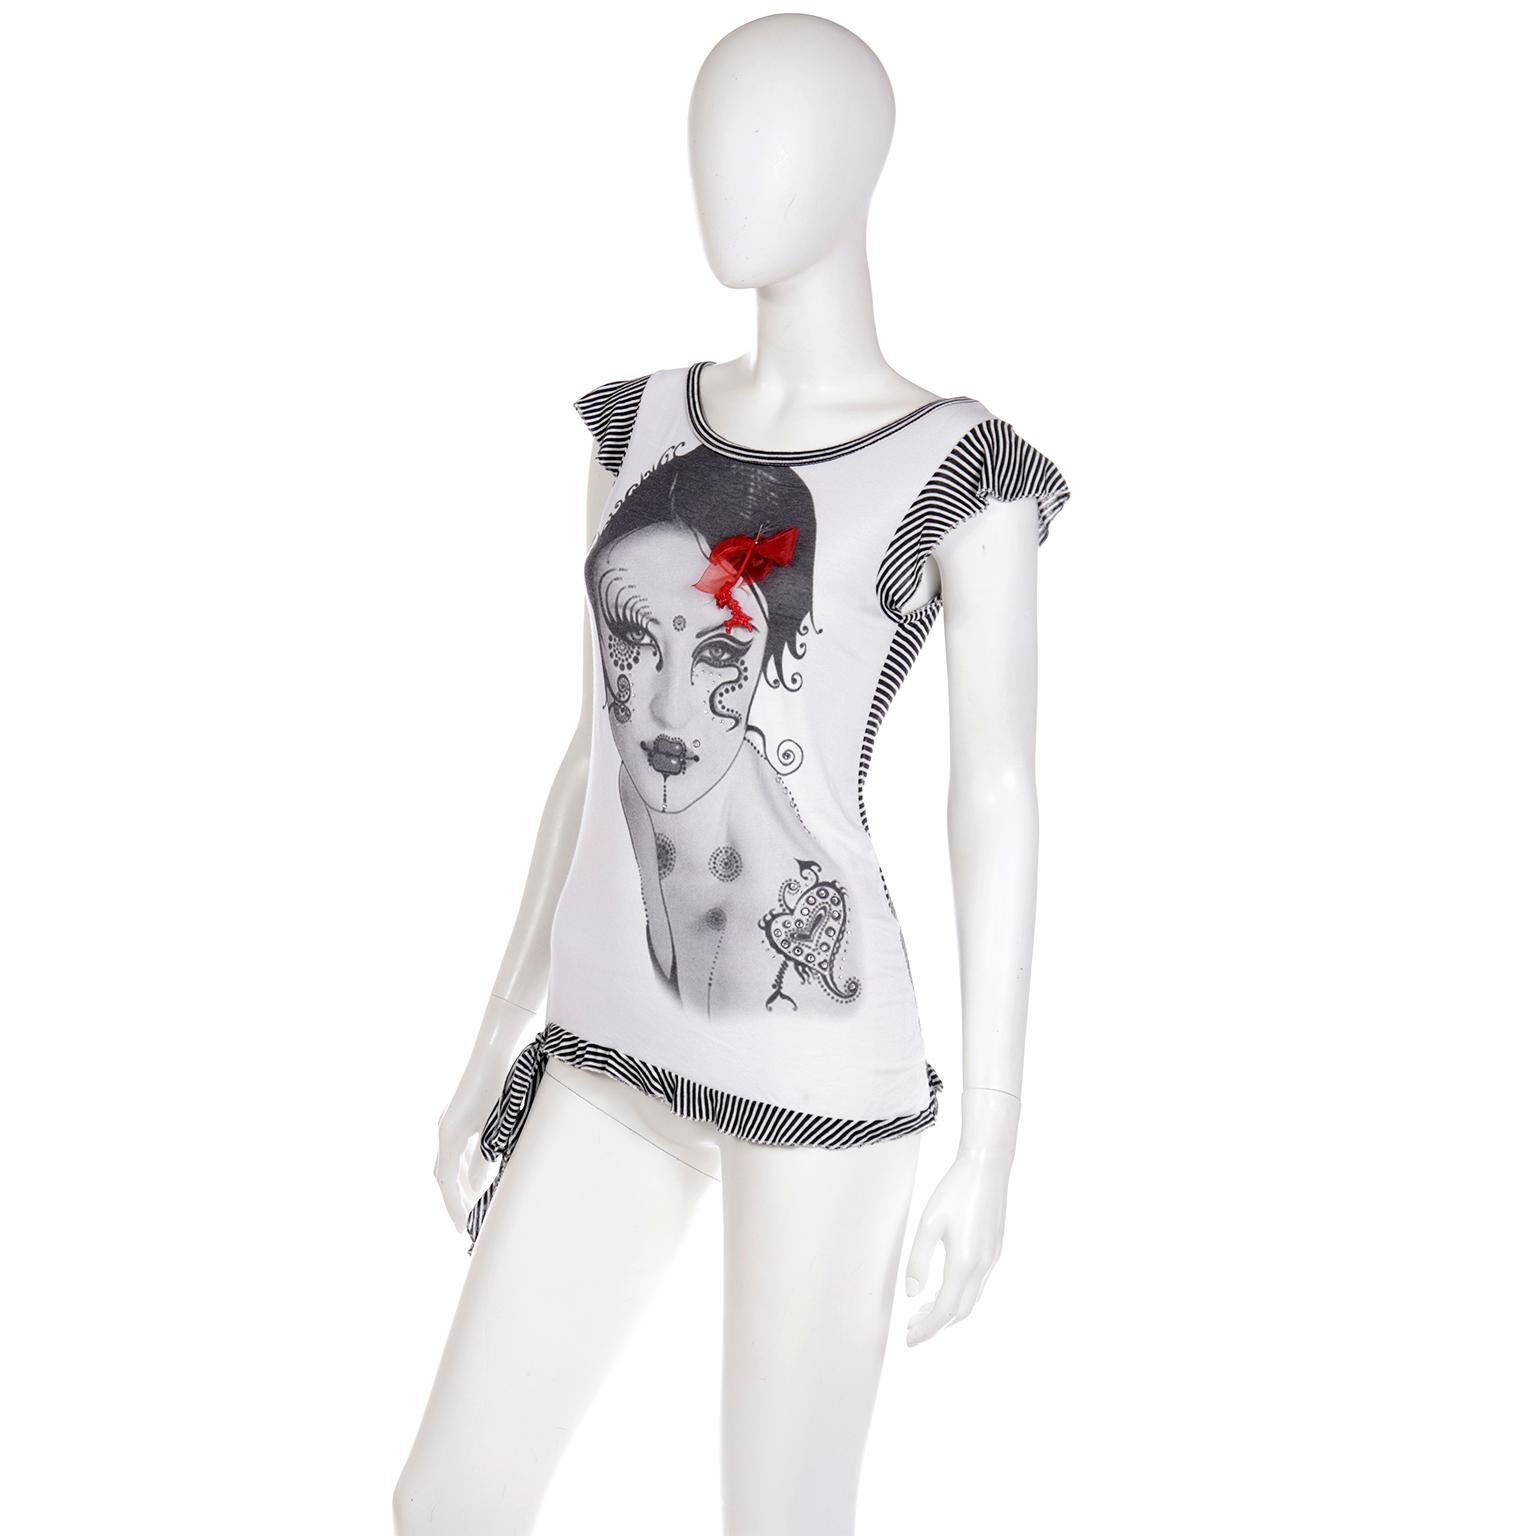 Gianfranco Ferre Black & White Vintage Novelty Top W Woman's Face & Rhinestones For Sale 1